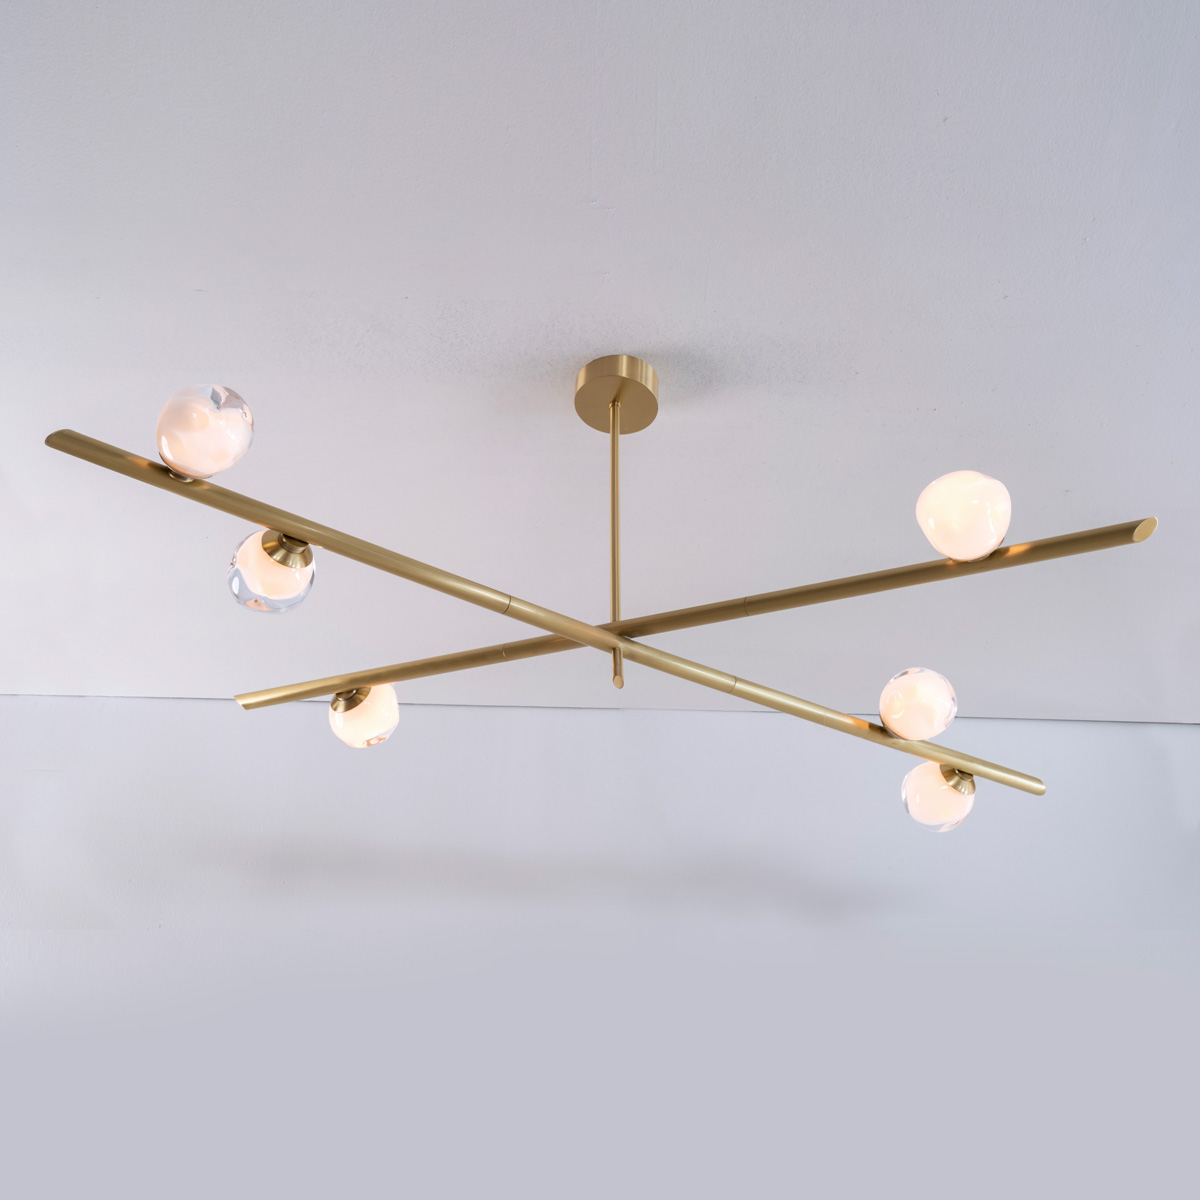 Antares X2 ceiling light by gaspare asaro